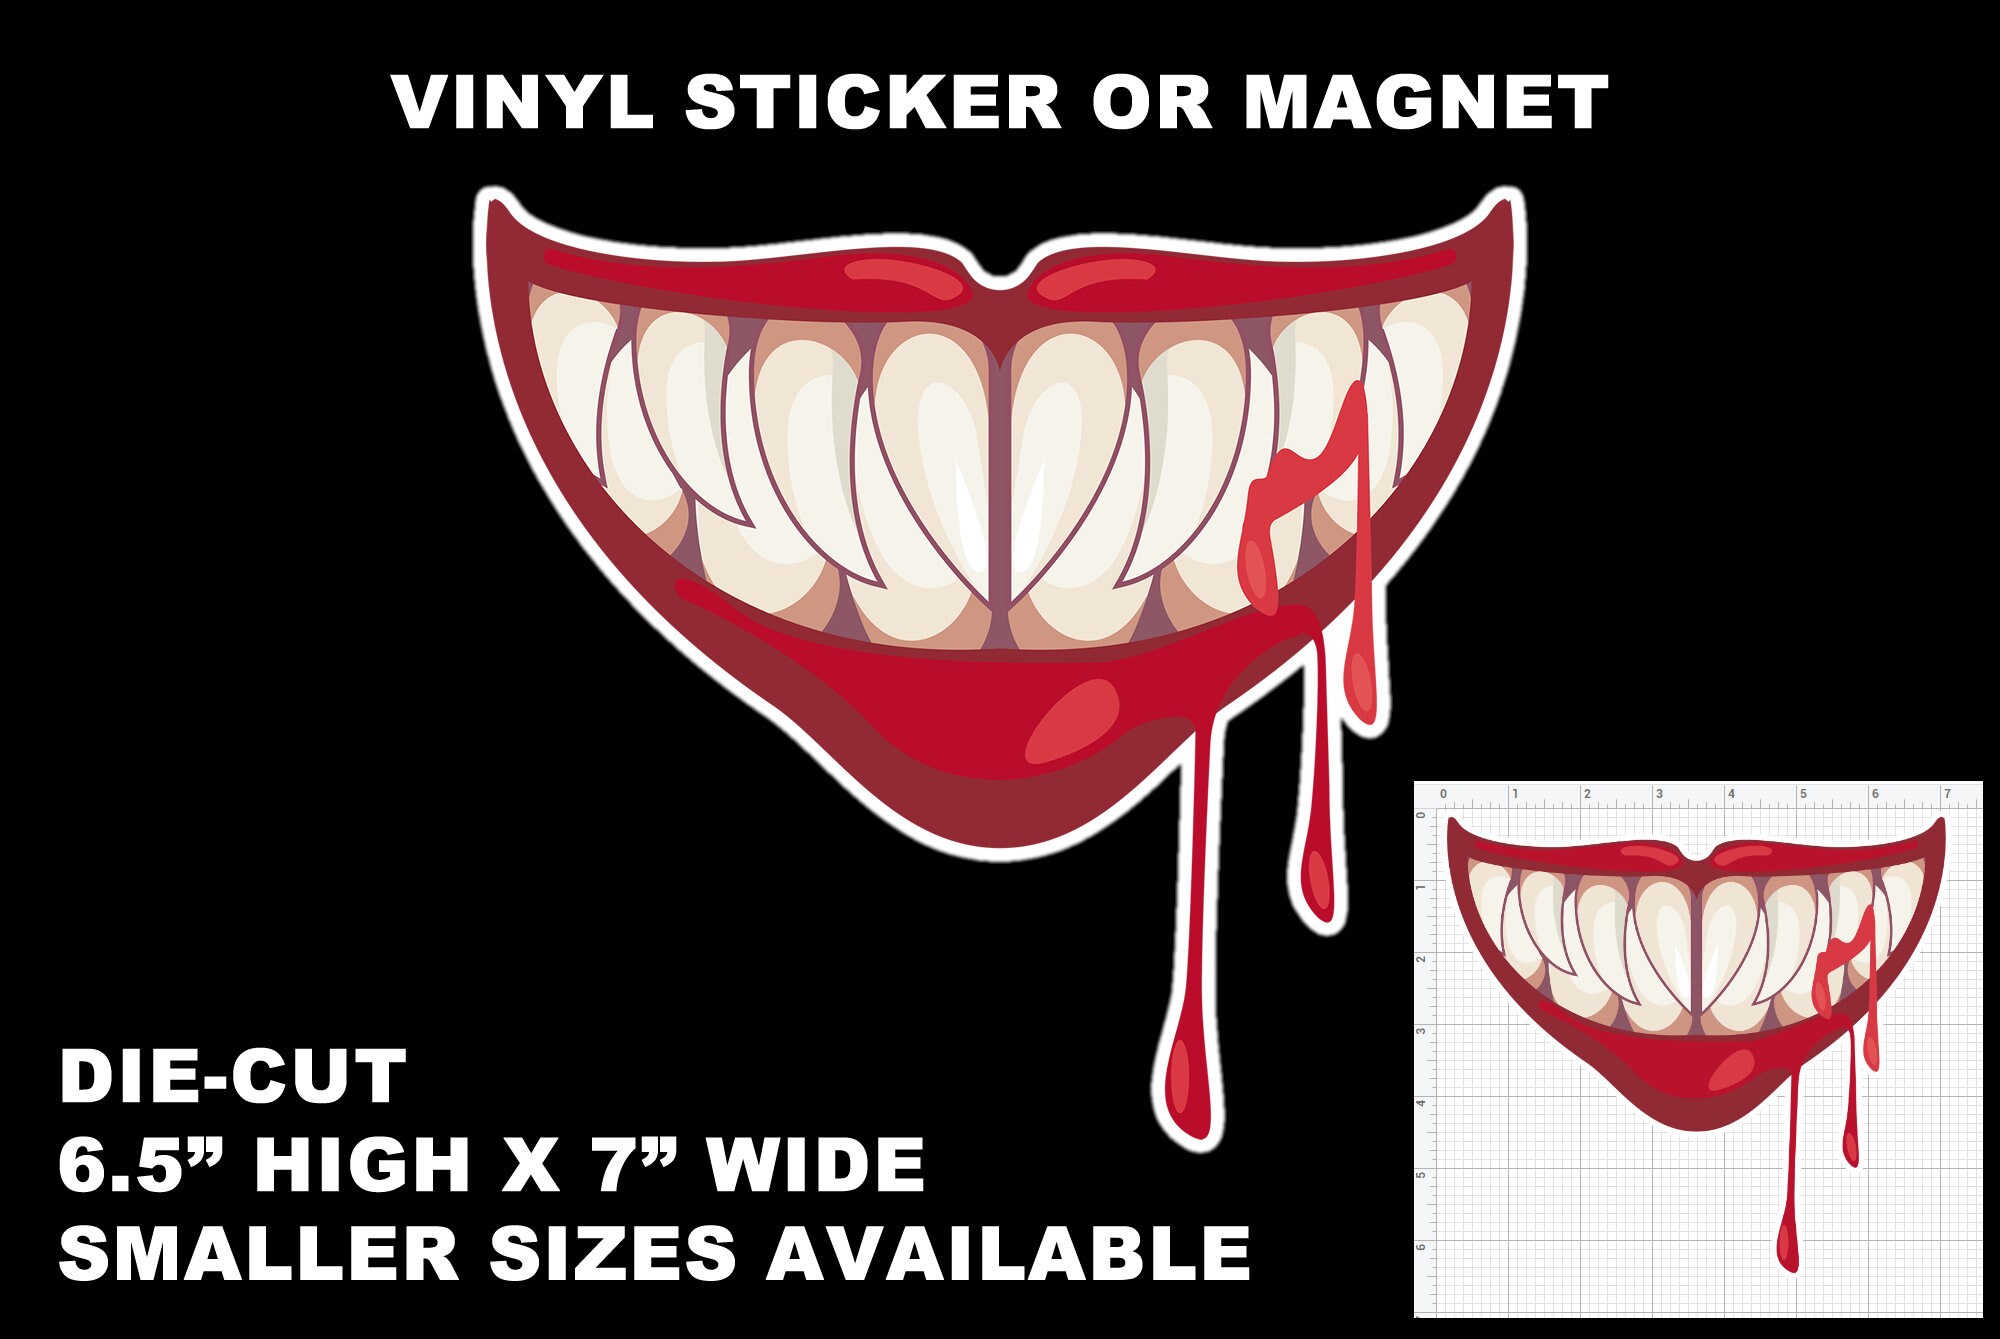 Evil smile die cut Quality Vinyl Sticker or Magnet VARIOUS SIZES with laminate coating